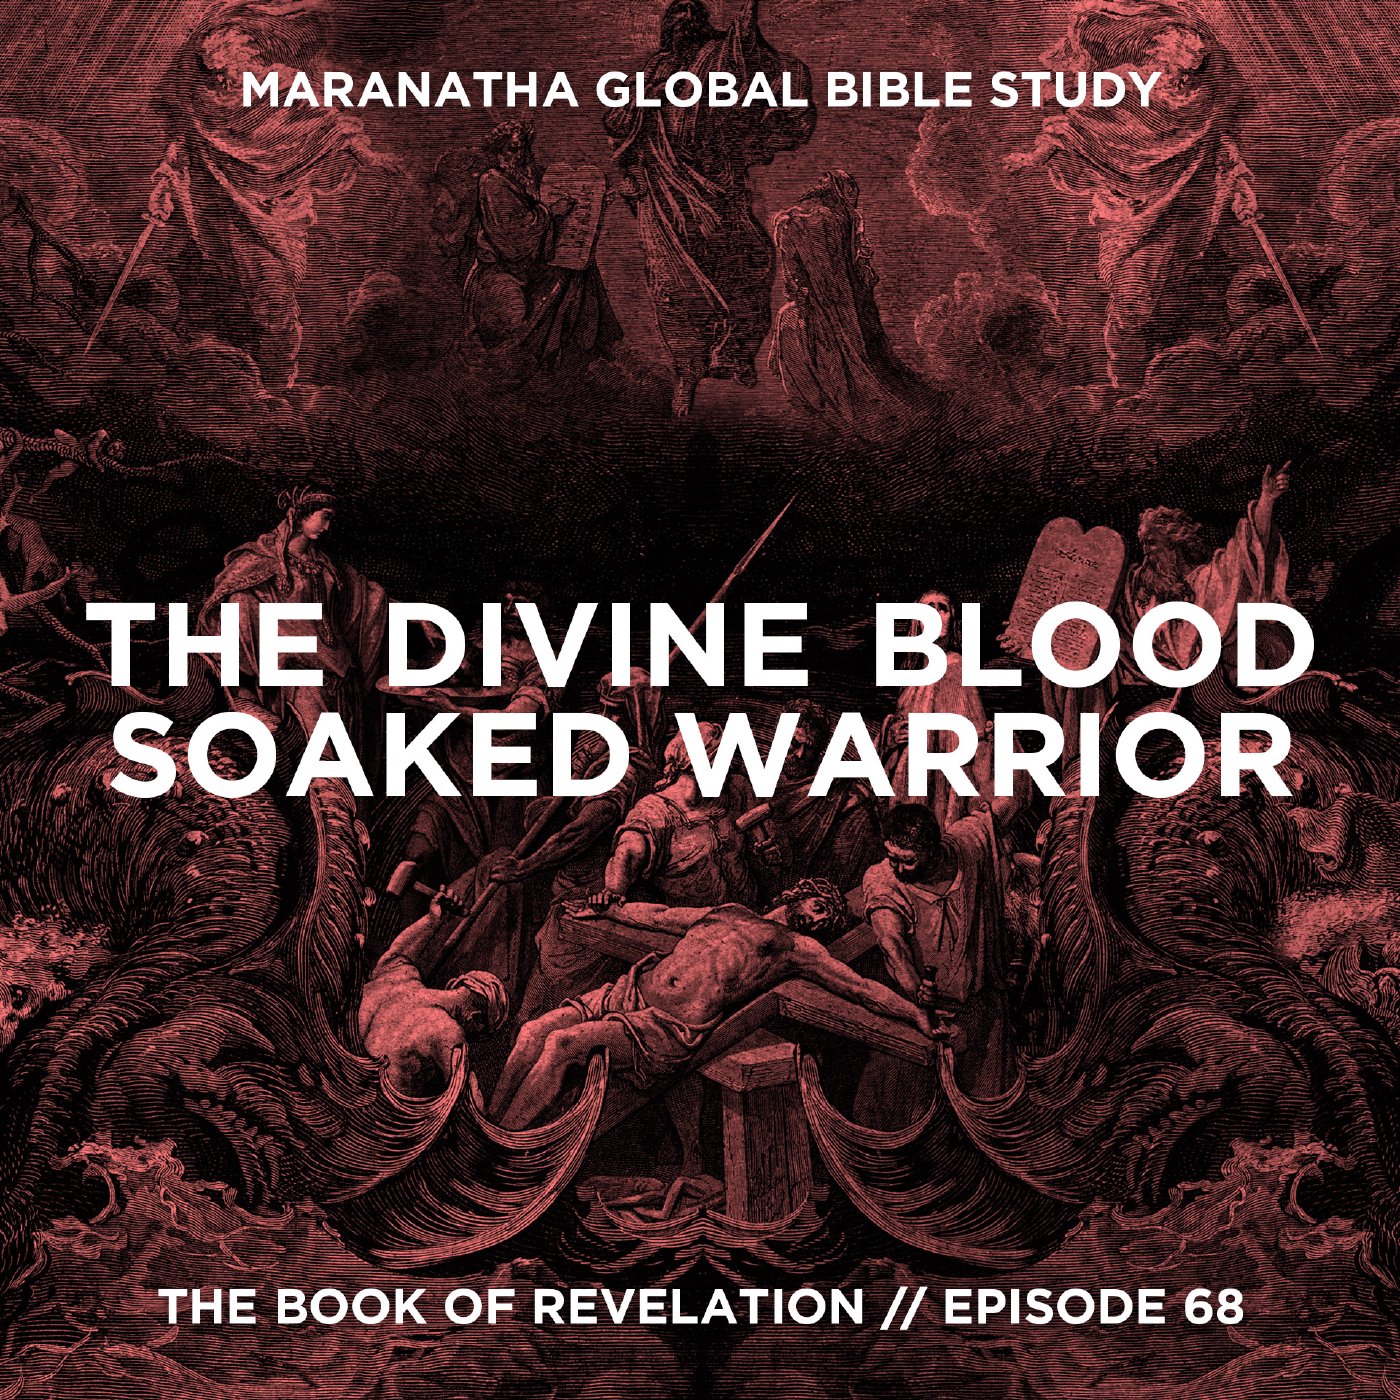 The Divine Blood Soaked Warrior // THE BOOK OF REVELATION with JOEL RICHARDSON